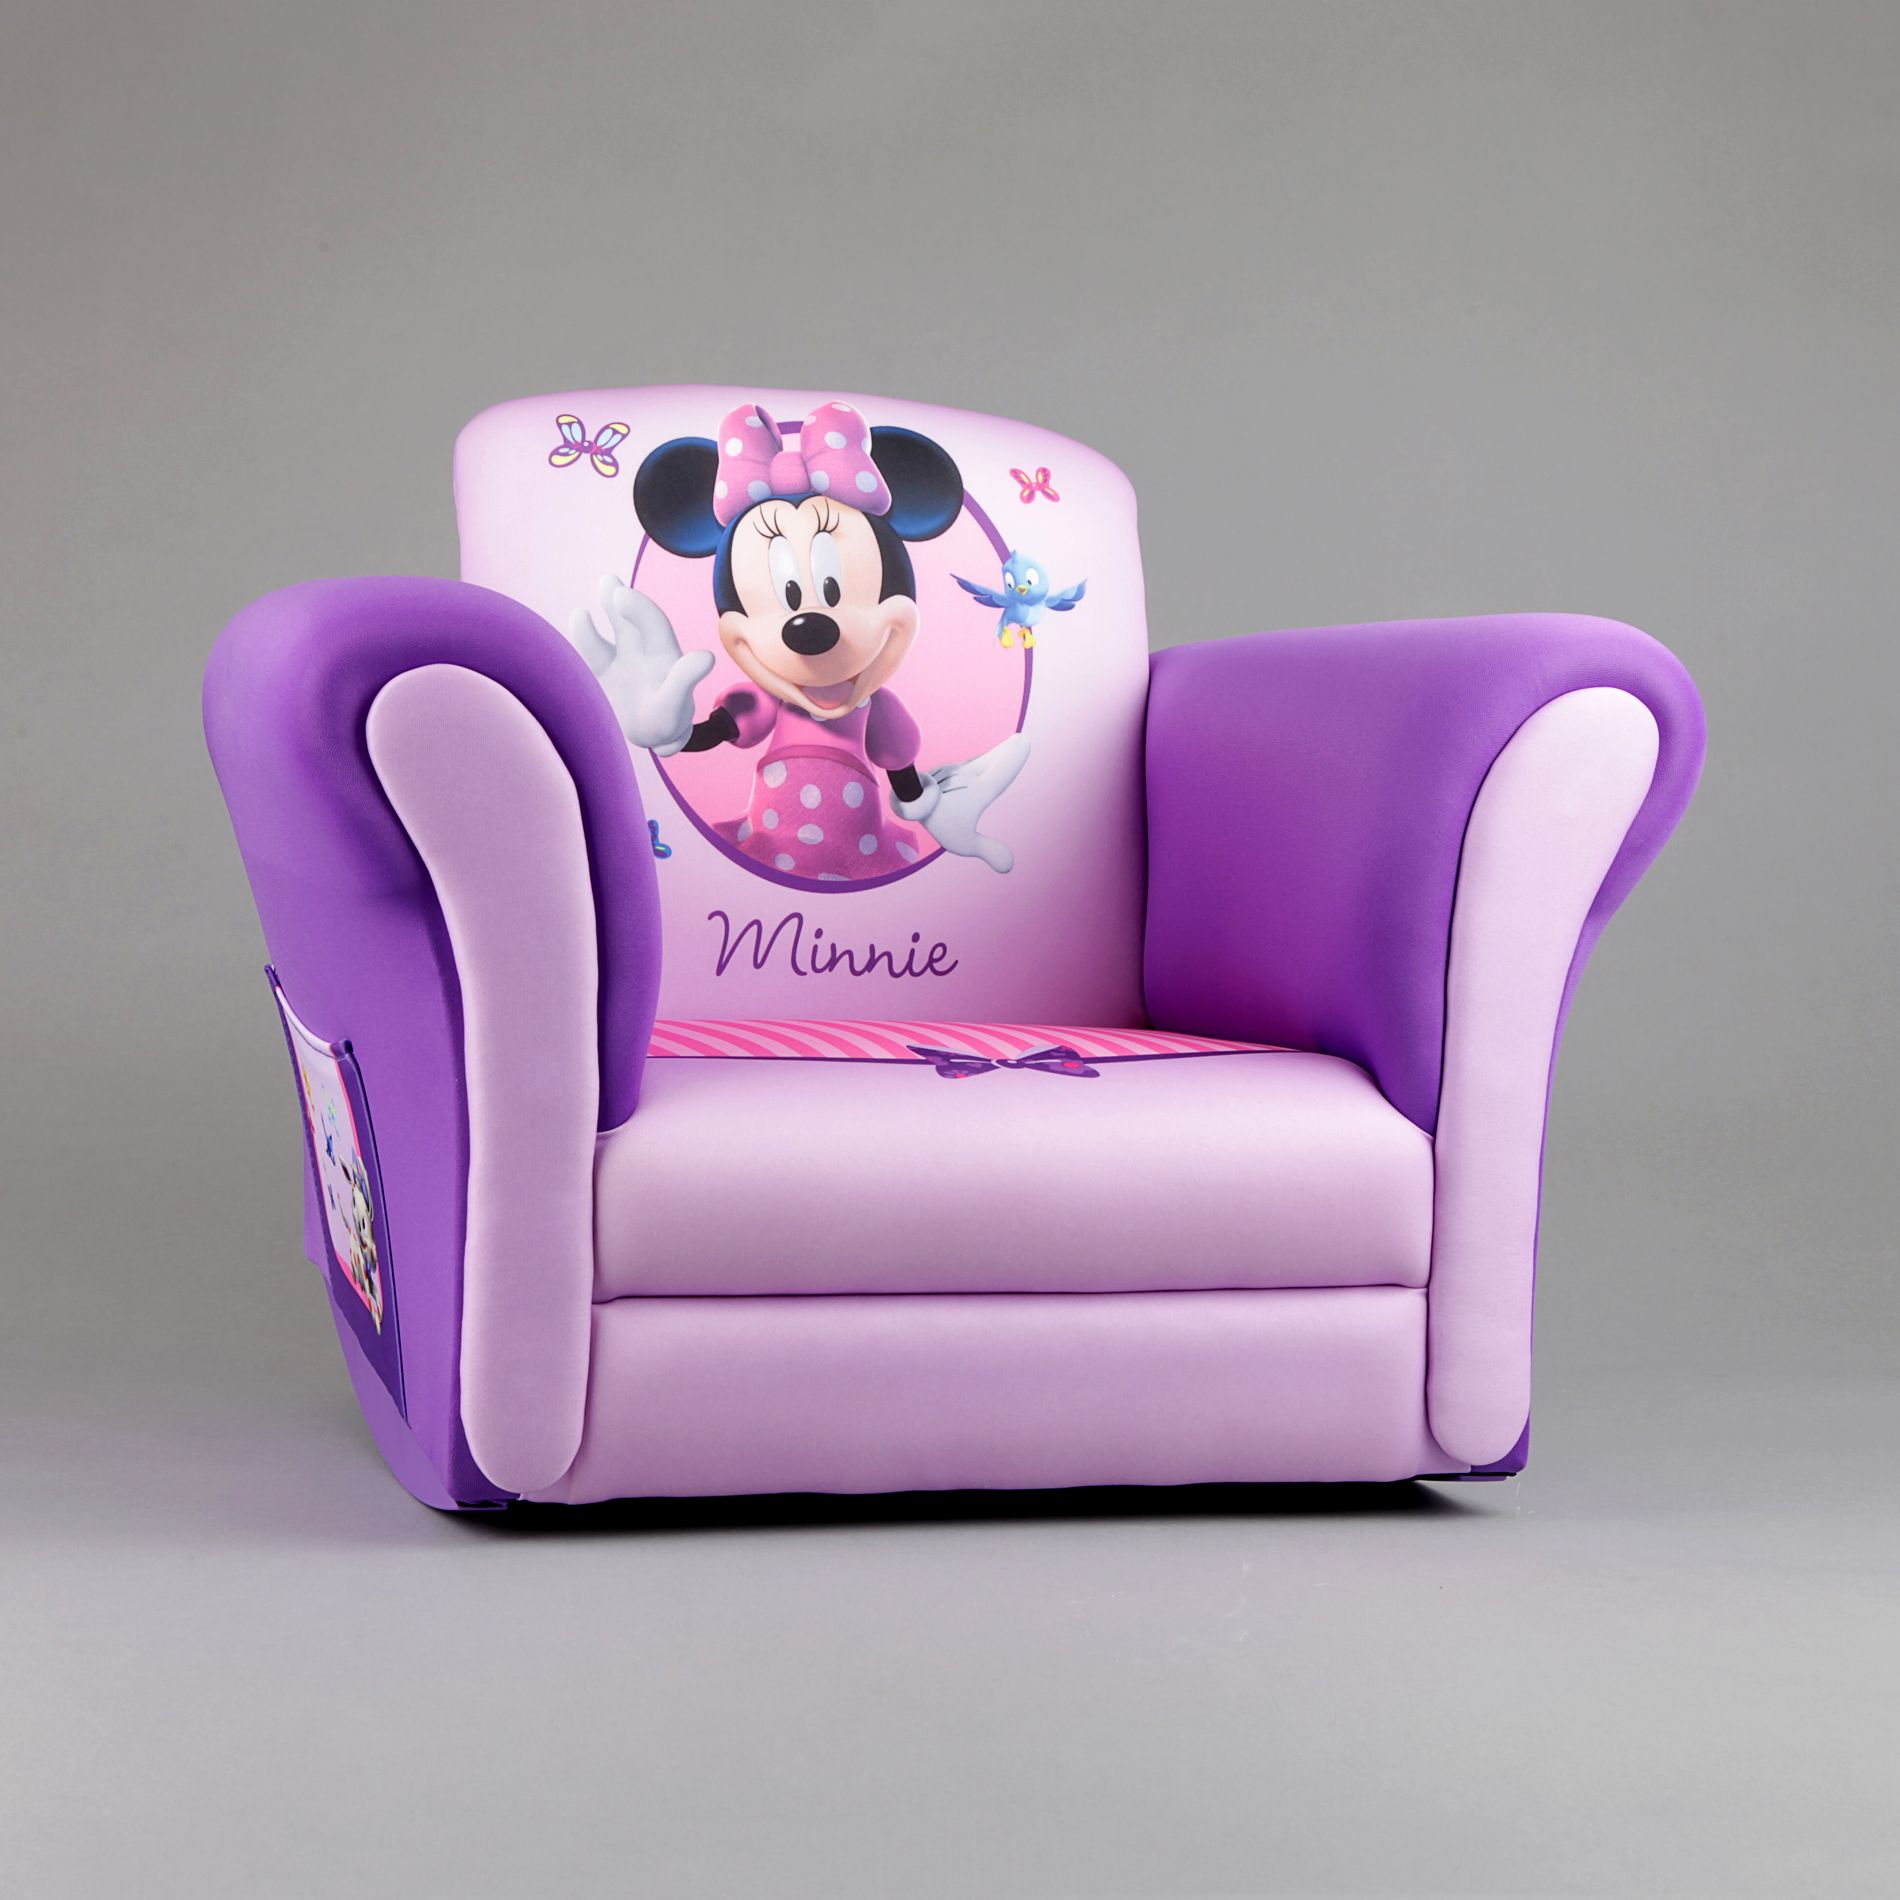 Delta Upholstered Child's Minnie Mouse Rocking Chair